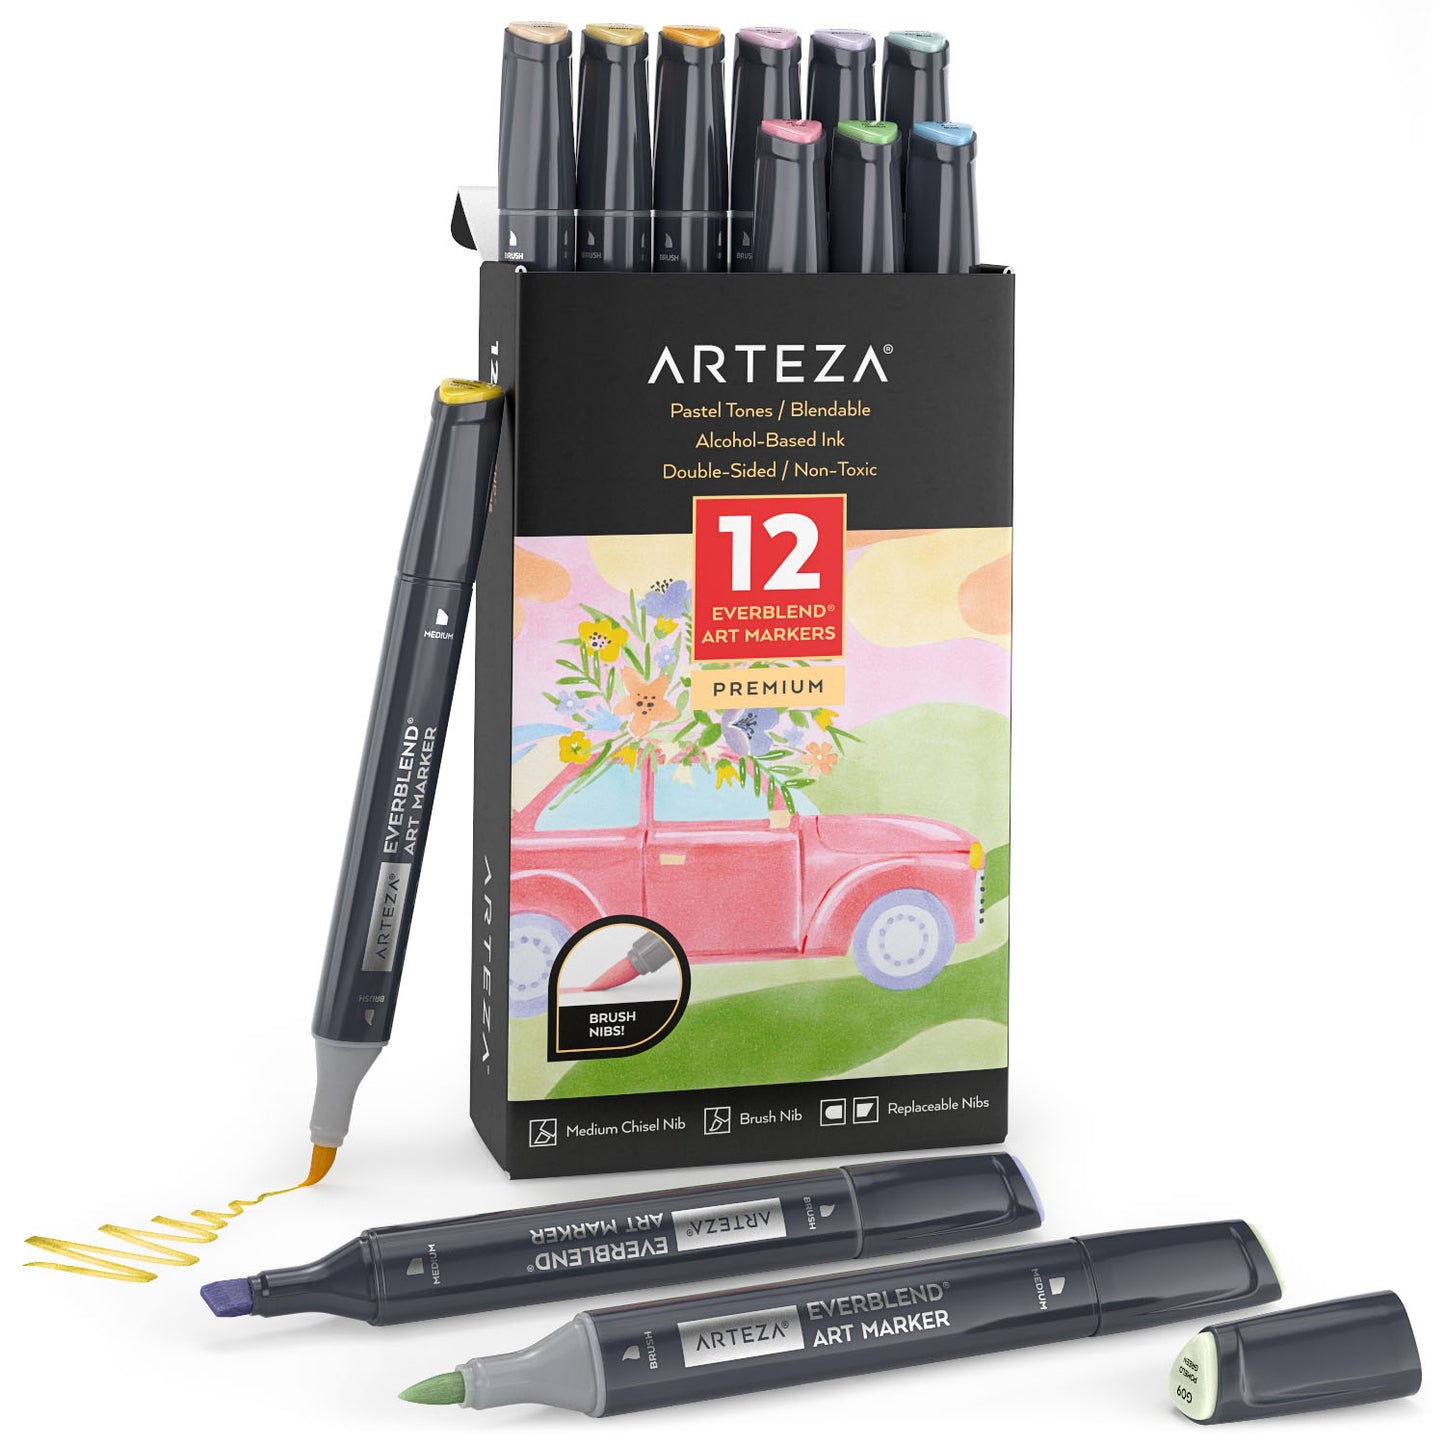 Arteza EverBlend Ultra Art Markers, Pastel Colors - Set of 12